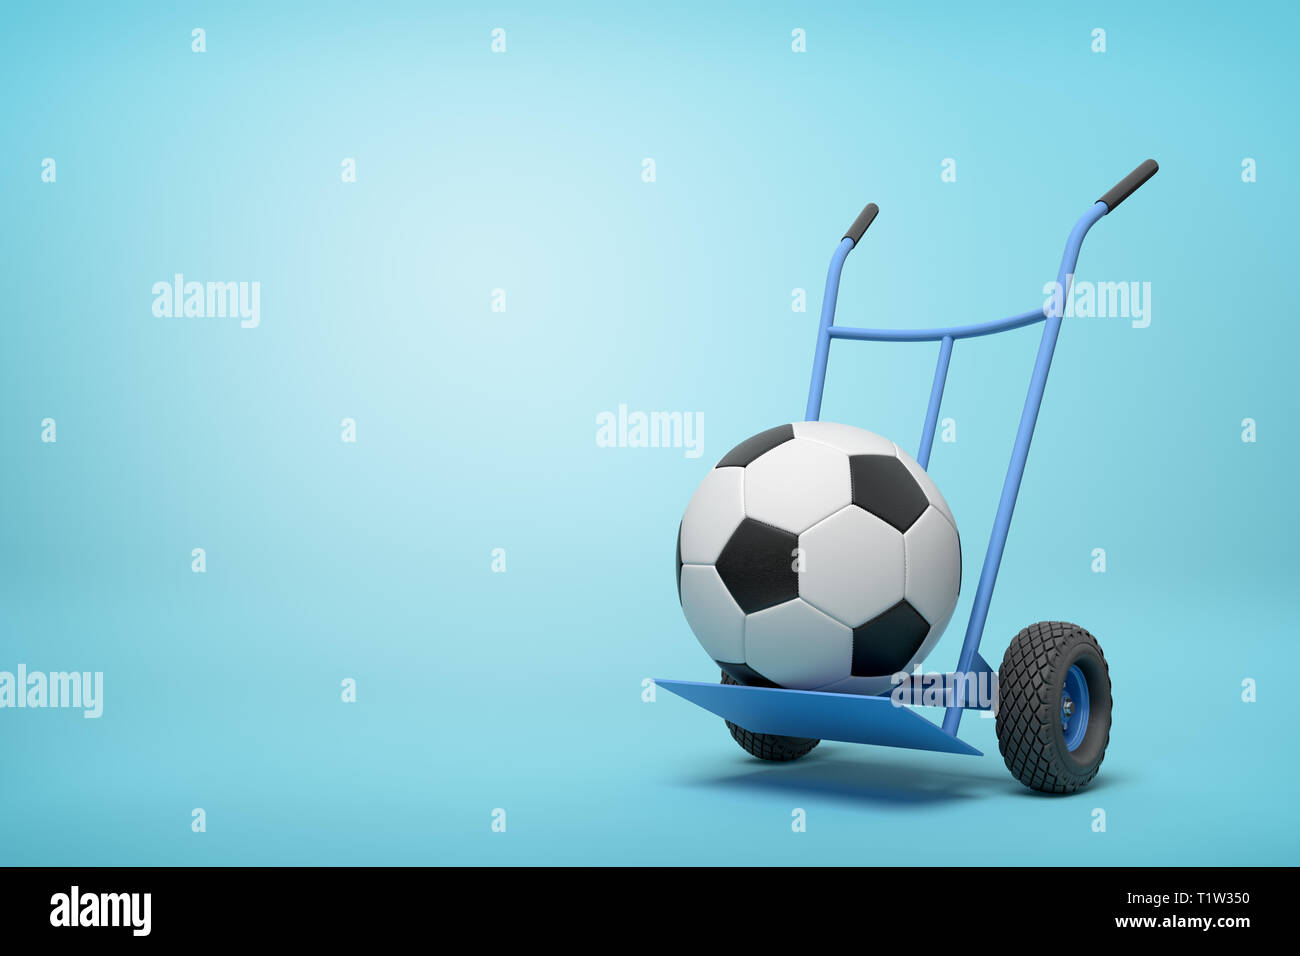 3d rendering of navy blue hand truck standing upright with football on it on light-blue background. Stock Photo